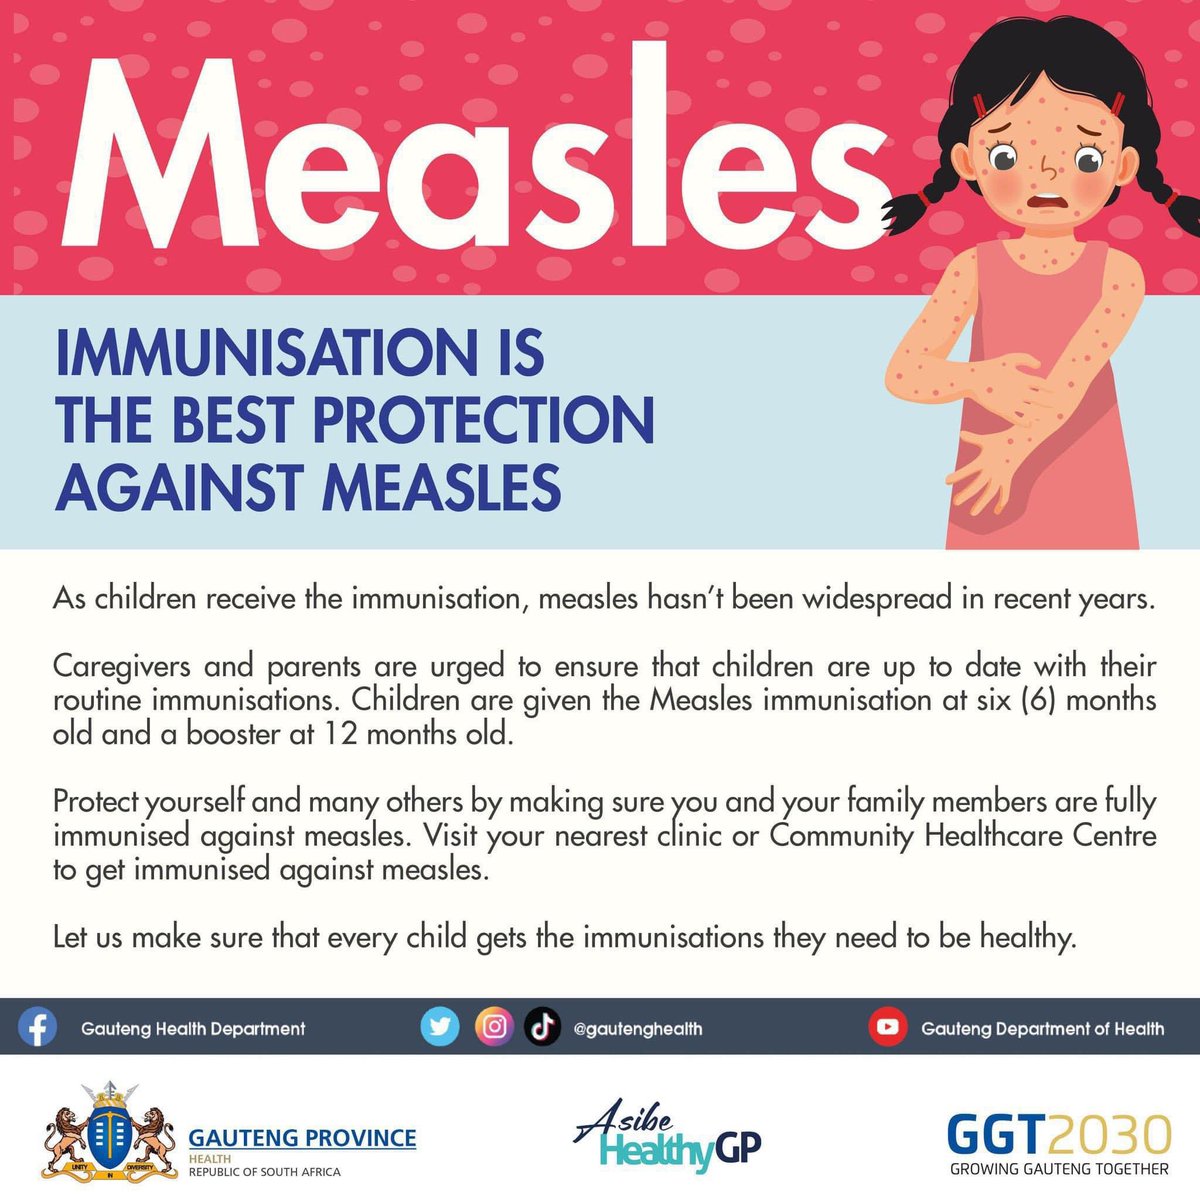 Parents and caregivers are urged to ensure that their children are up to date with their routine vaccination to protect them against diseases like measles #MeaslesOutbreak #AsibeHealthyGP